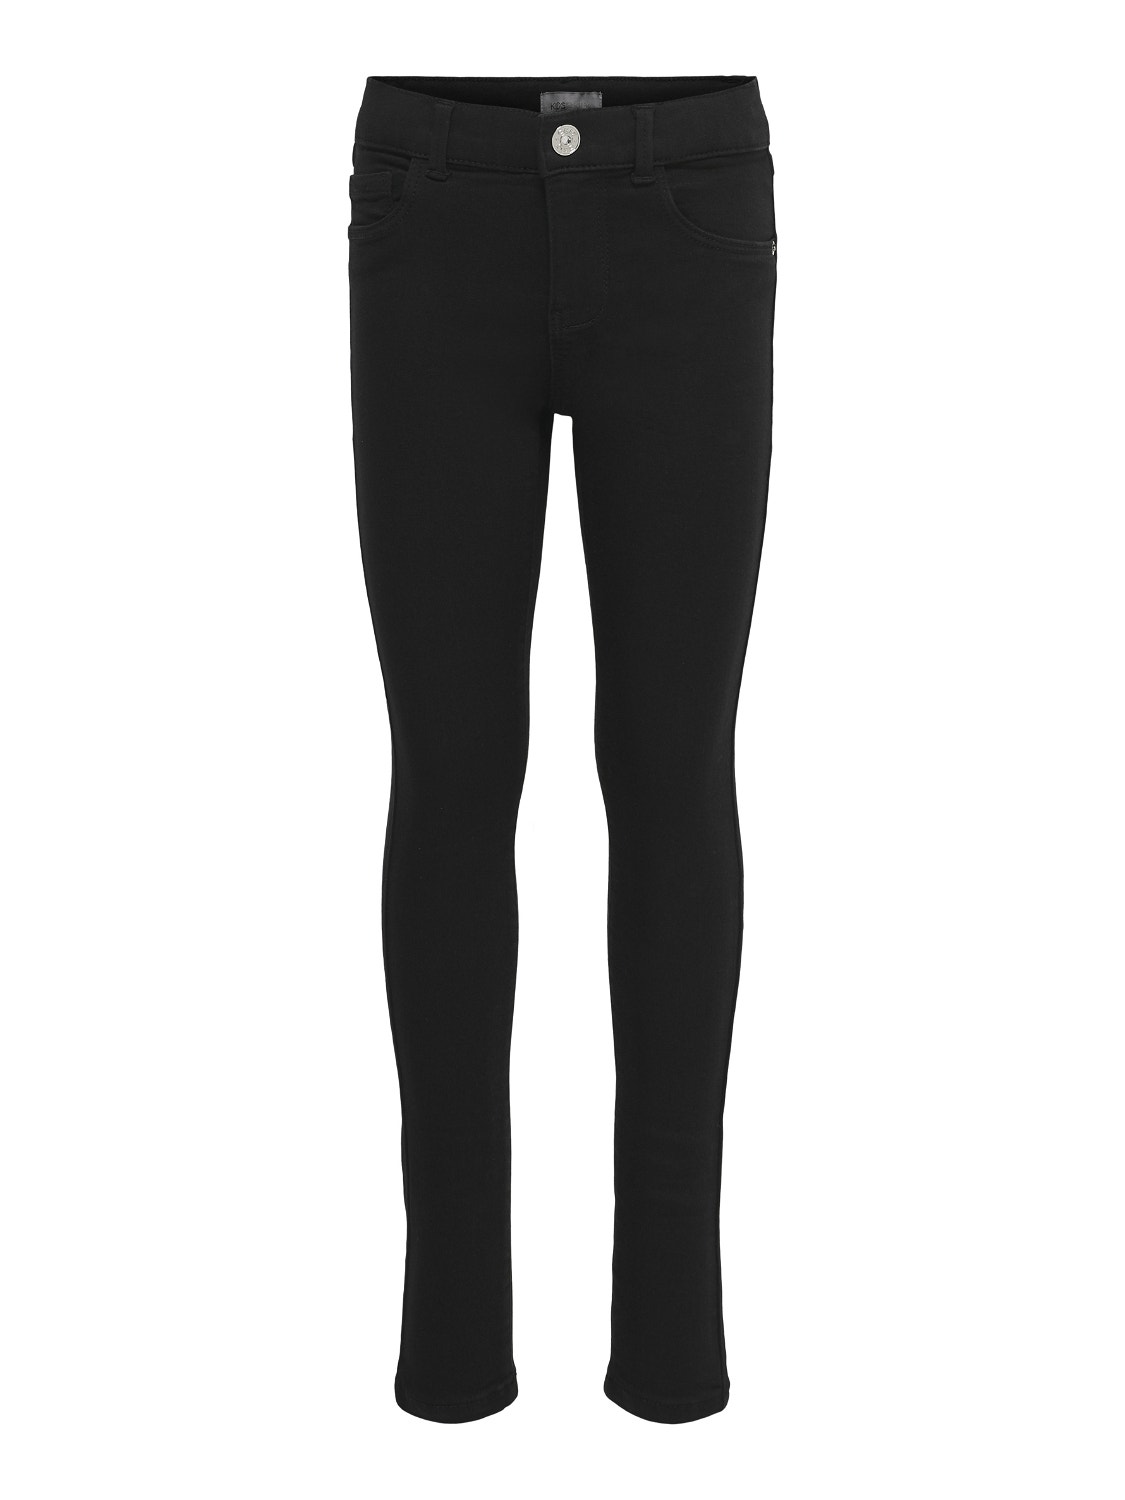 ONLY Skinny Fit Jeans -Black - 15234583